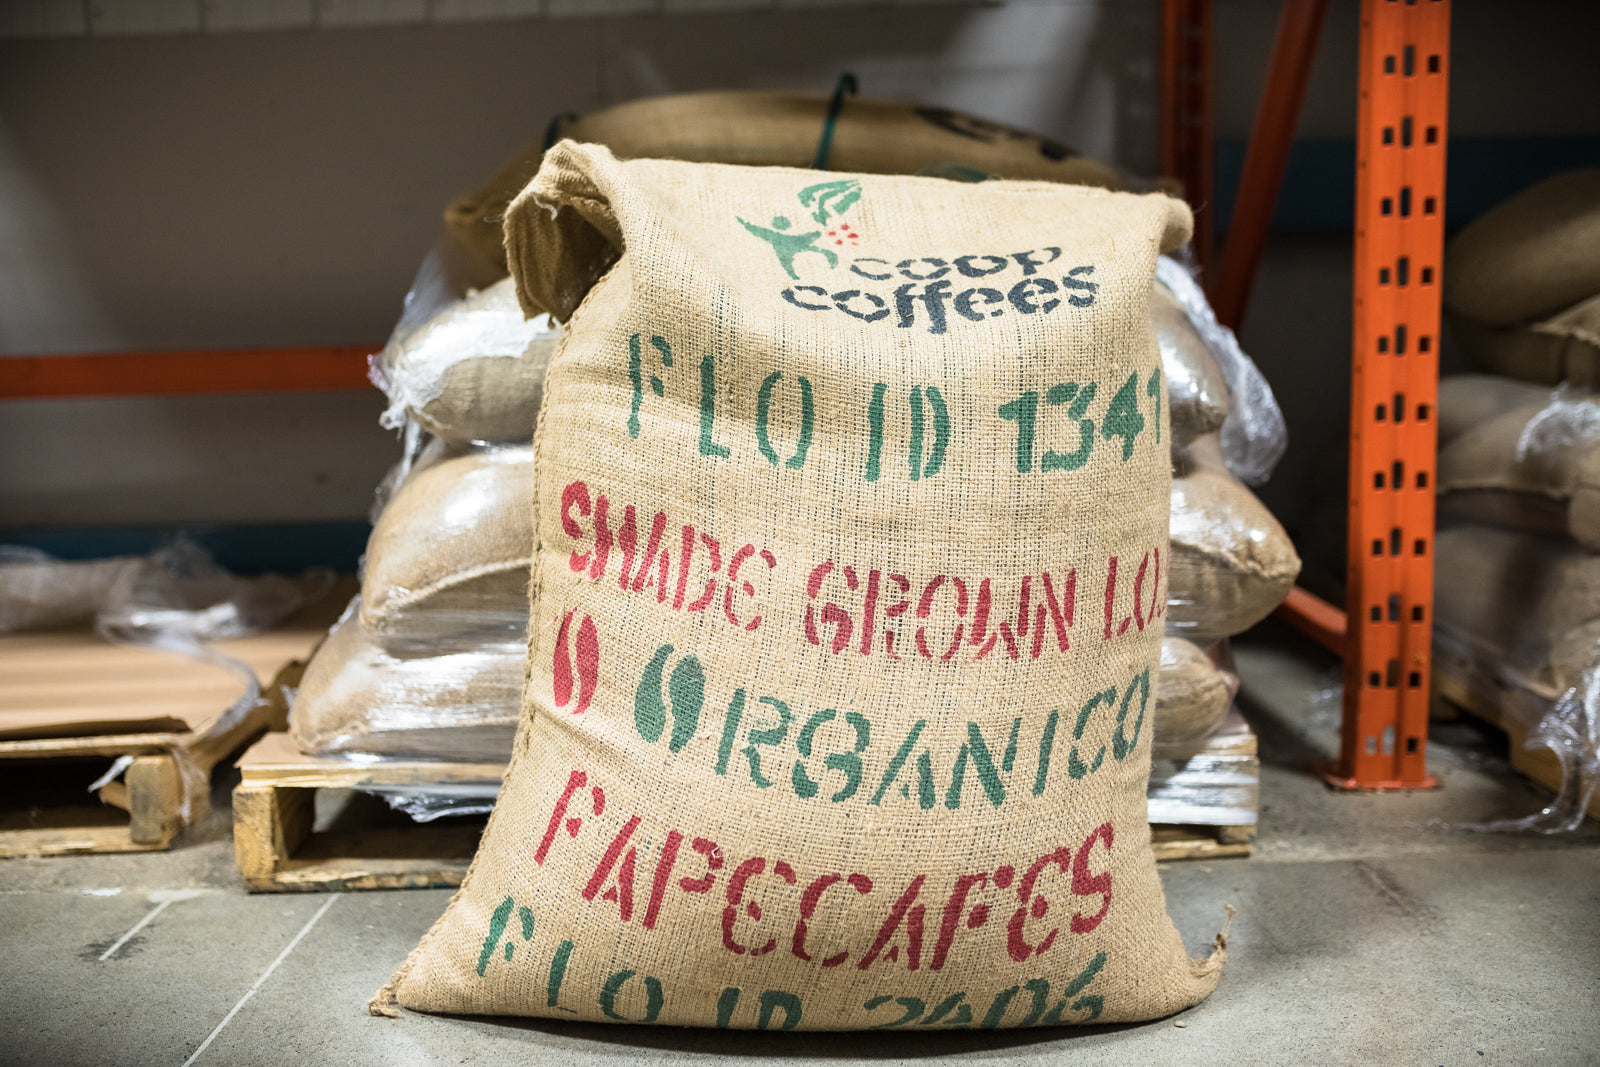 A burlap bag filled with green coffee beans from Coop Coffees.